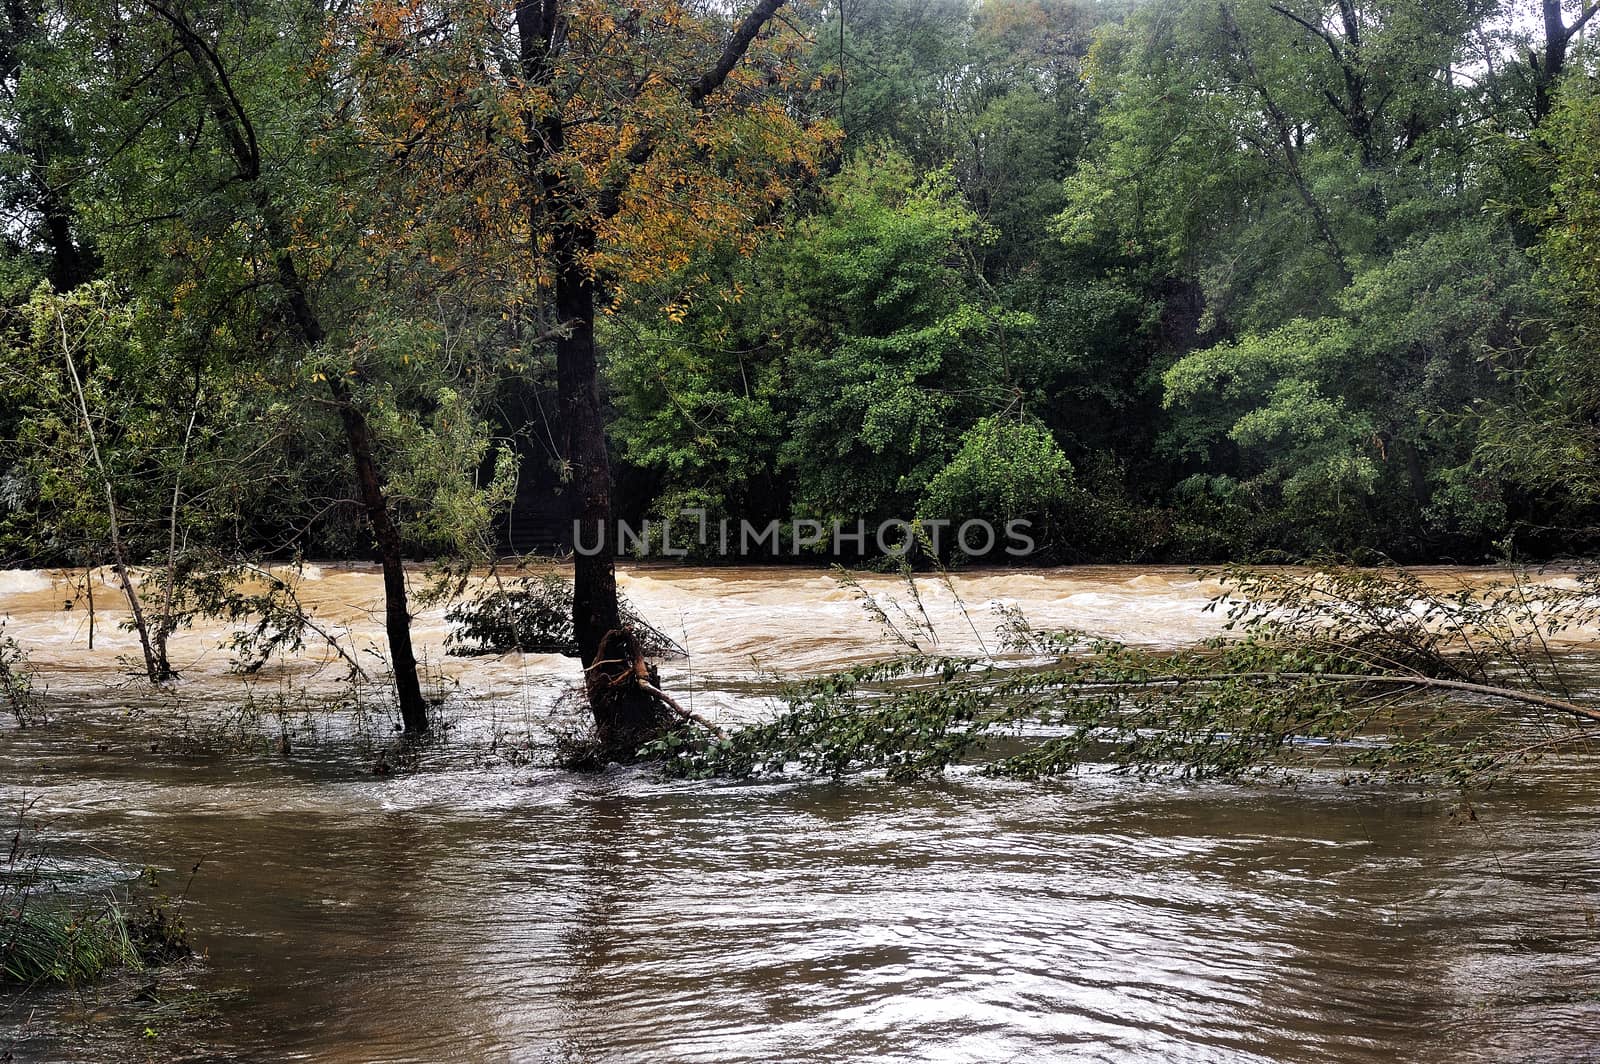 The Vidourle river in flood after heavy rains by gillespaire